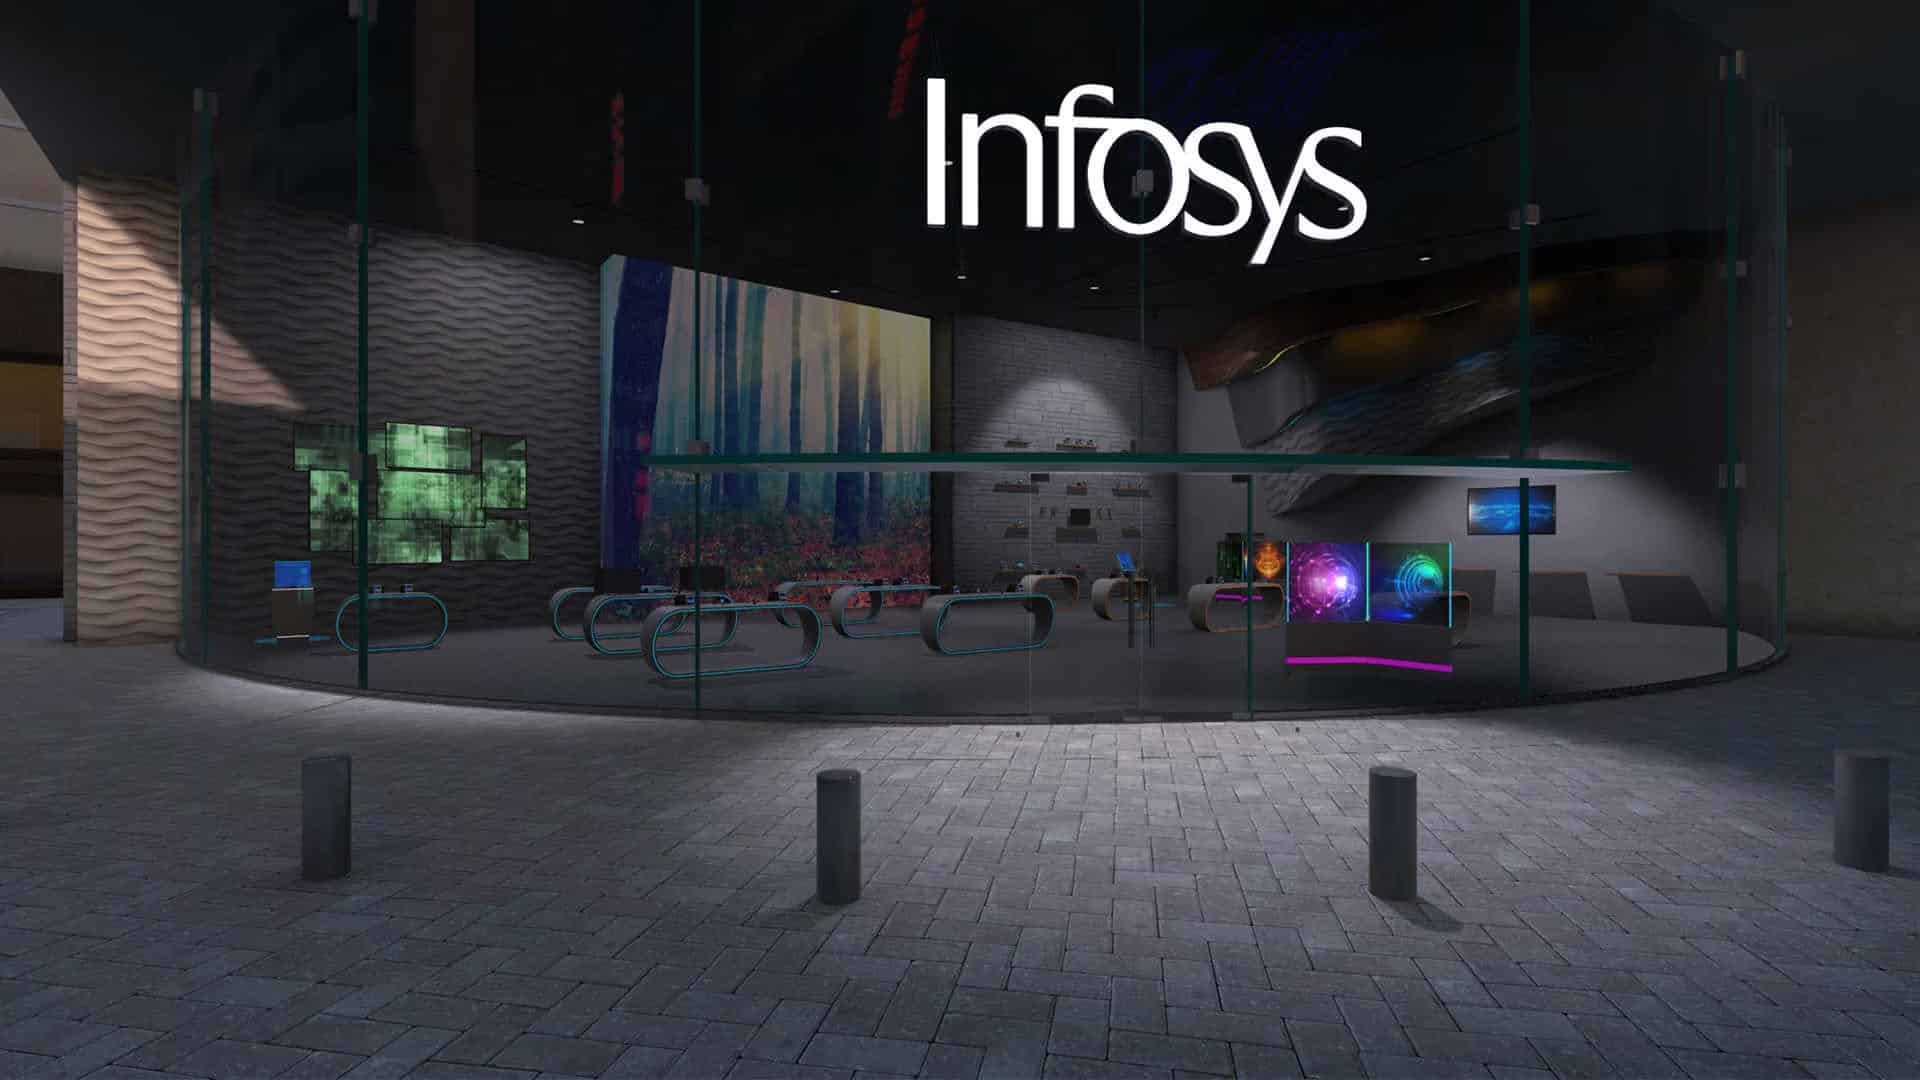 Infosys partners with Walmart Commerce Technologies to deliver omnichannel solutions to retailers